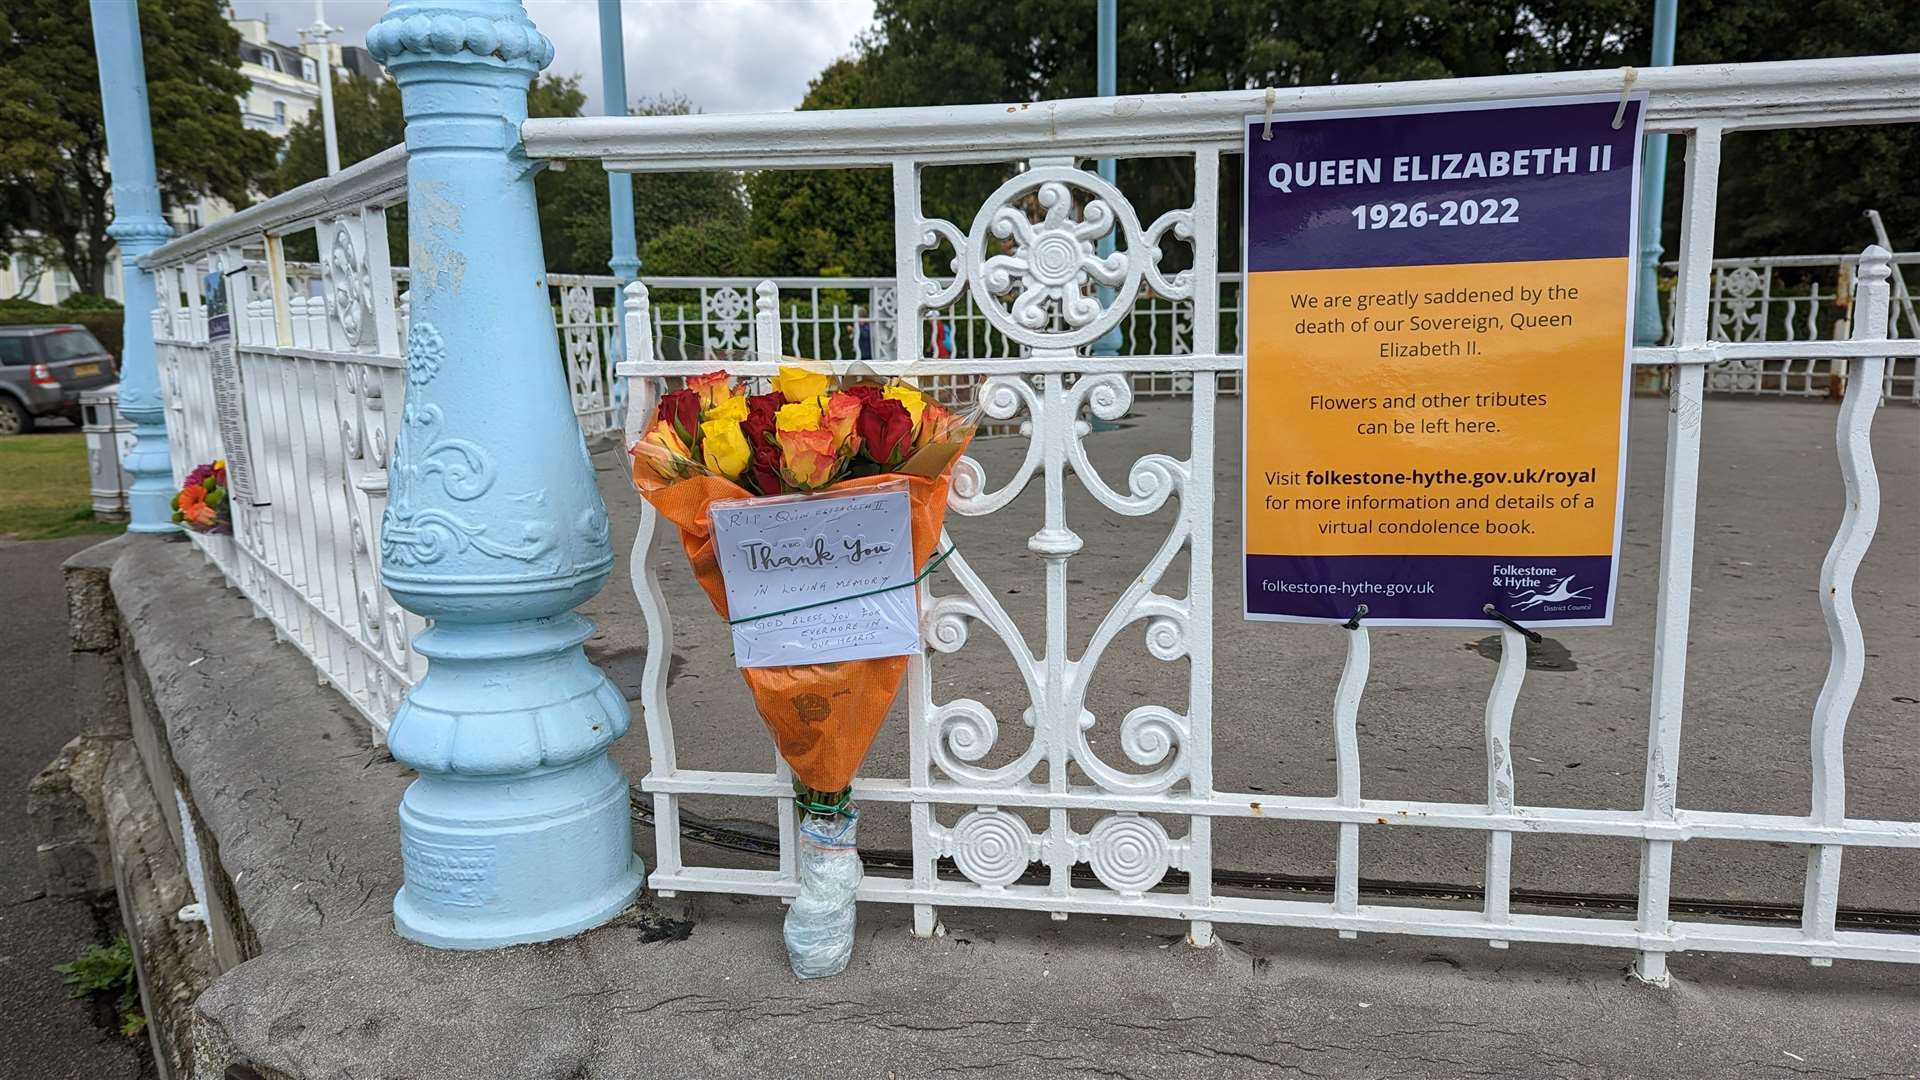 Floral tributes can be left at the bandstand on The Leas in Folkestone